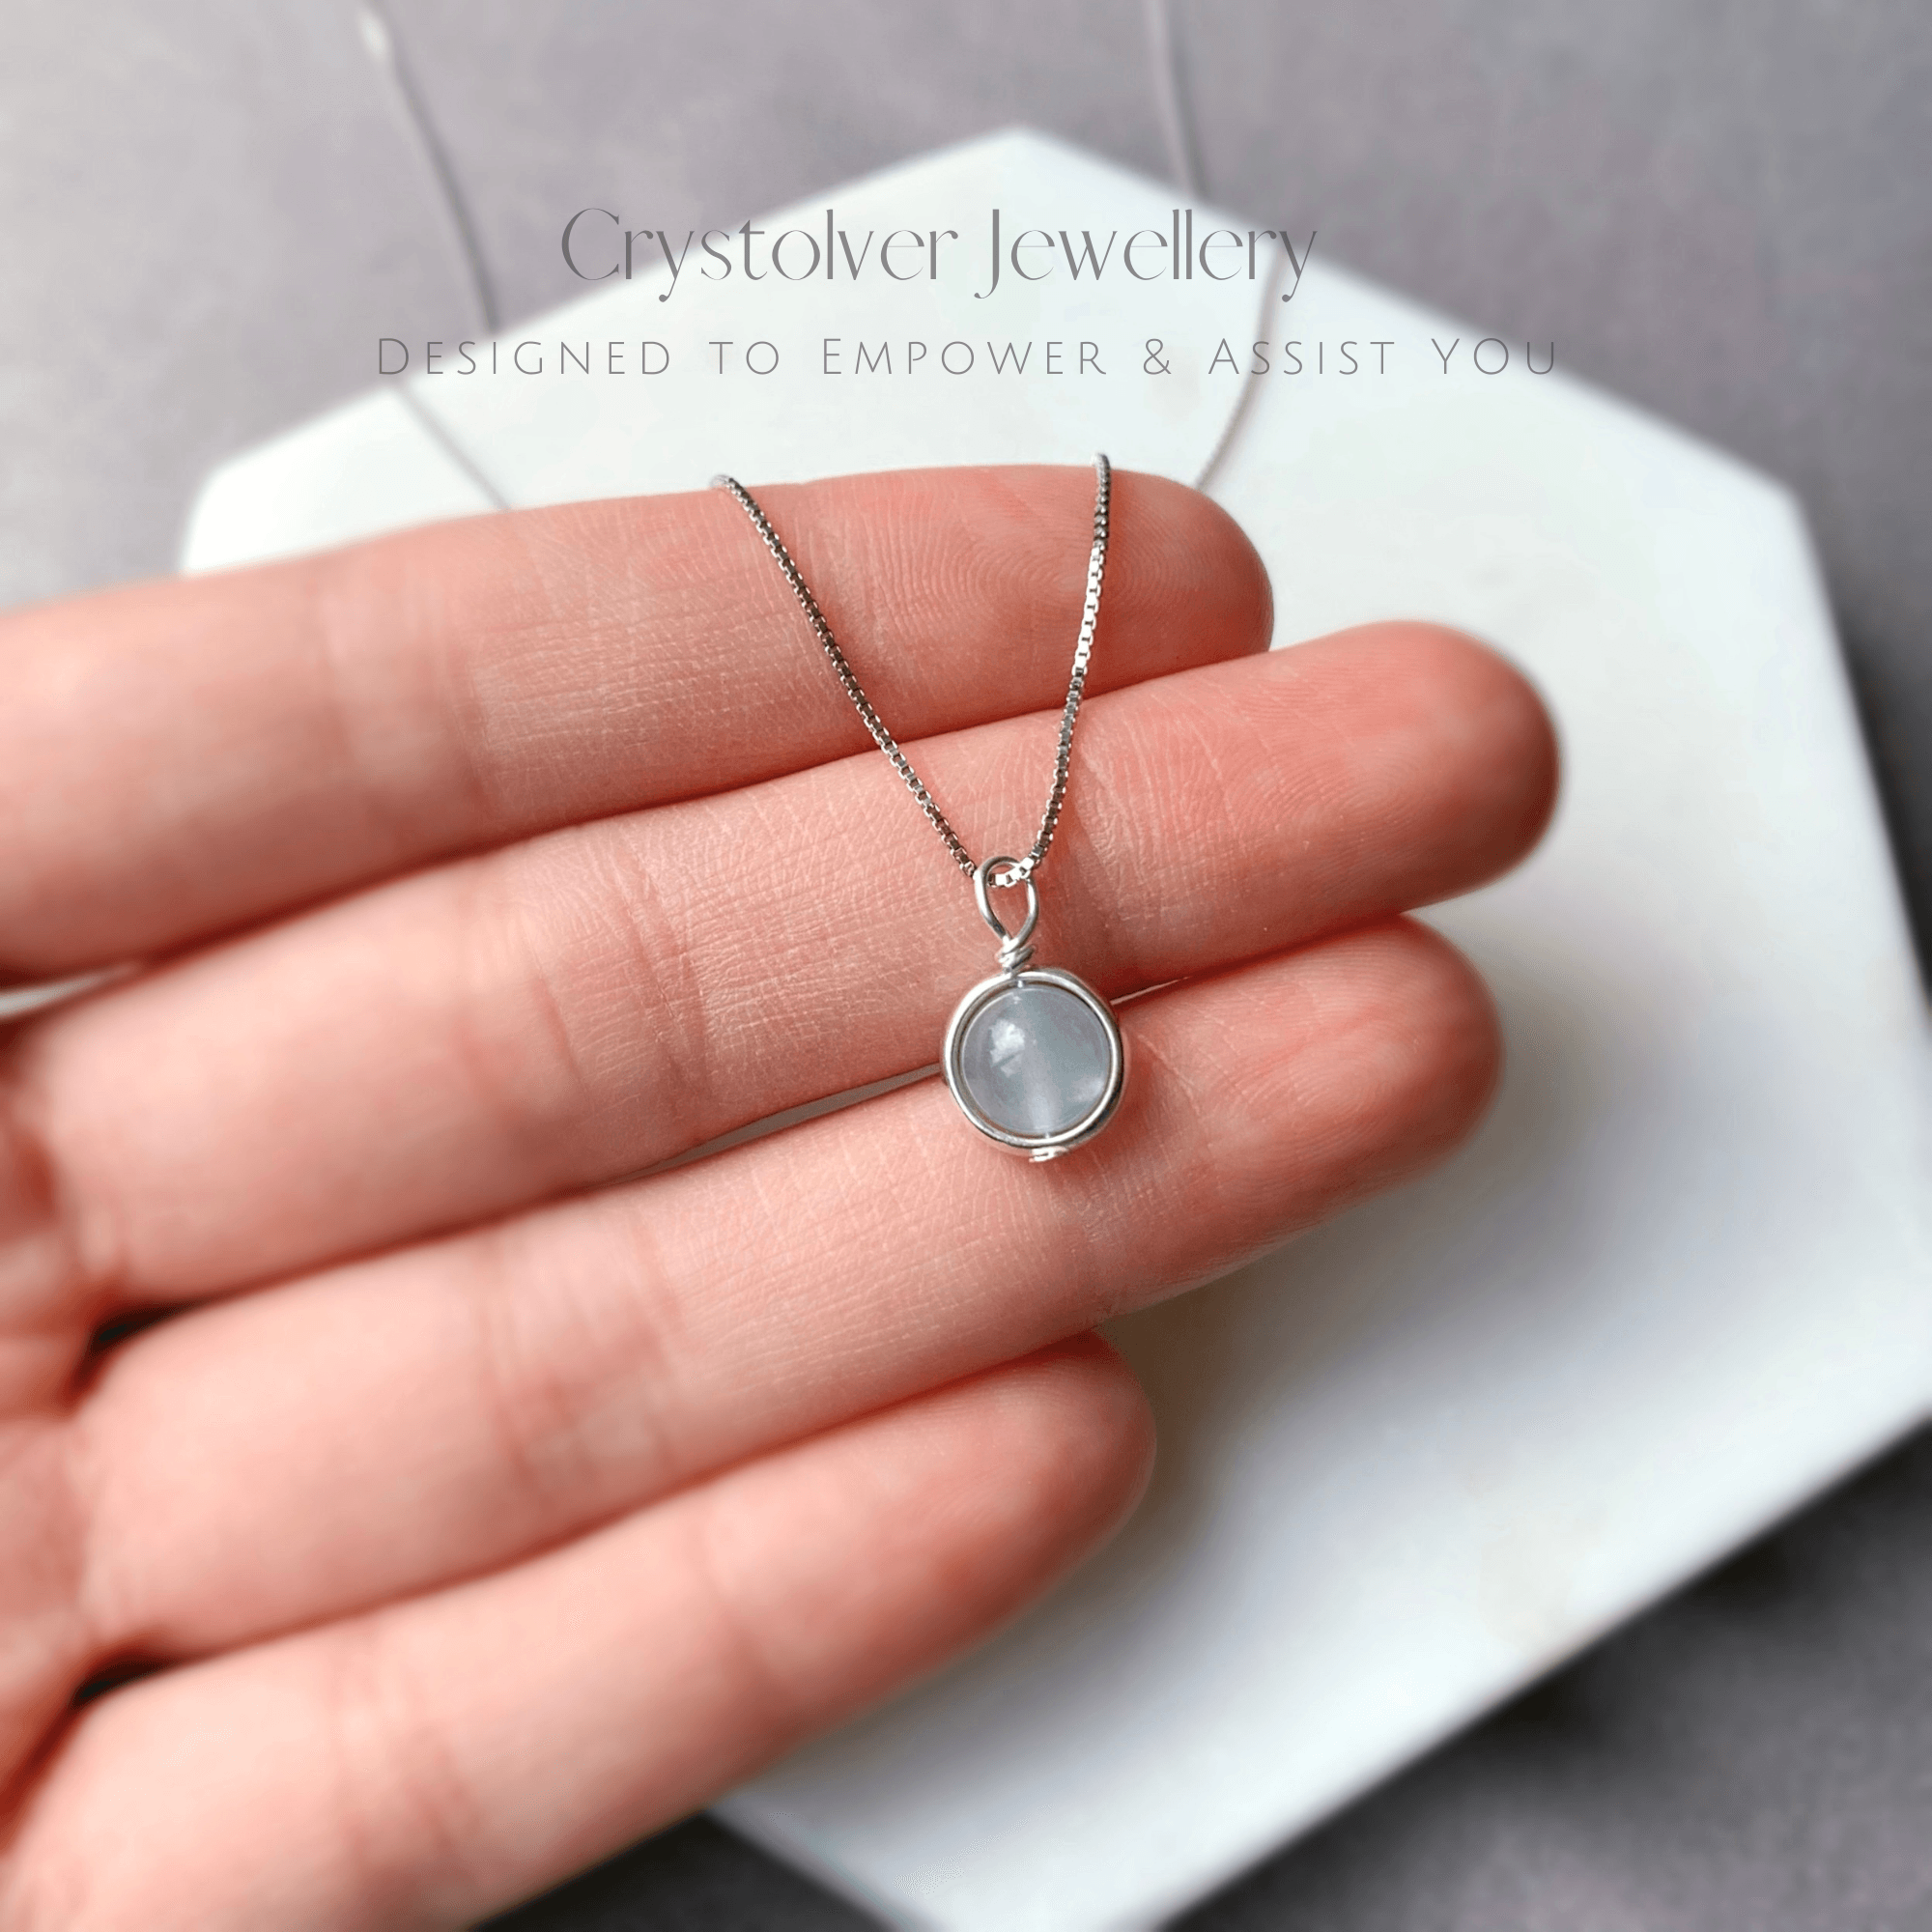 Two Star Necklace Sterling Silver Dainty Necklace Silver Star Necklace Tiny  Star Necklace Minimalist Necklace Gifts for Her - Etsy | Beautiful necklaces,  Tiny star necklace, Star necklace silver